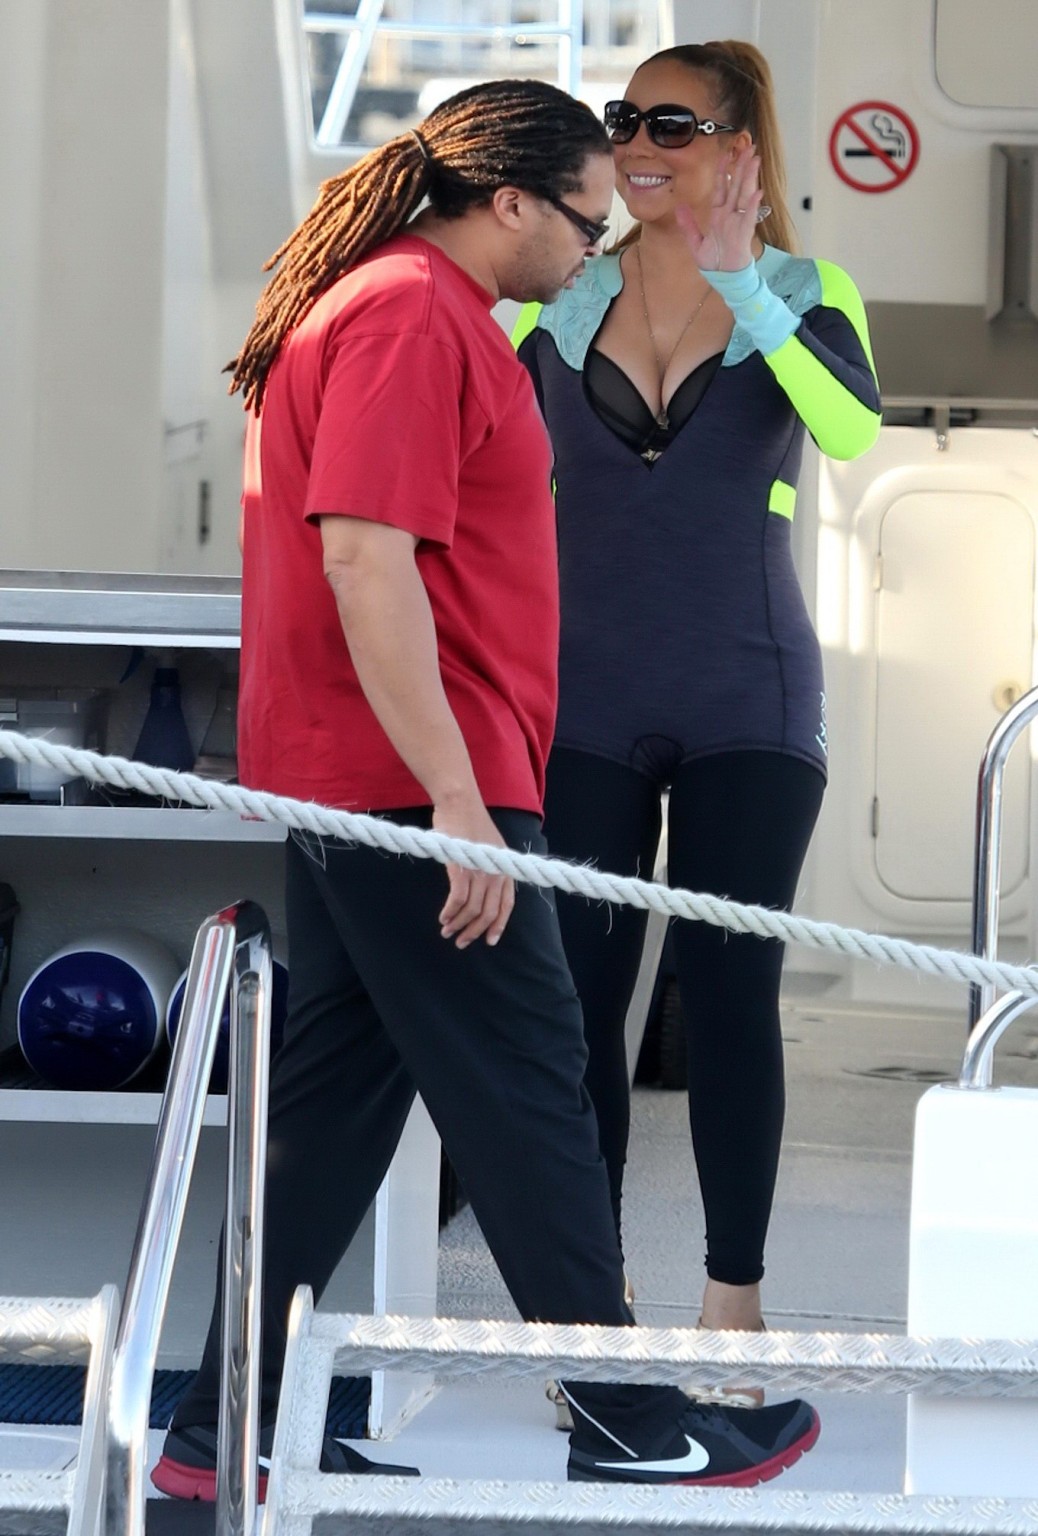 Busty Mariah Carey wearing bikini top and wet suit for a boat ride in Perth #75180585